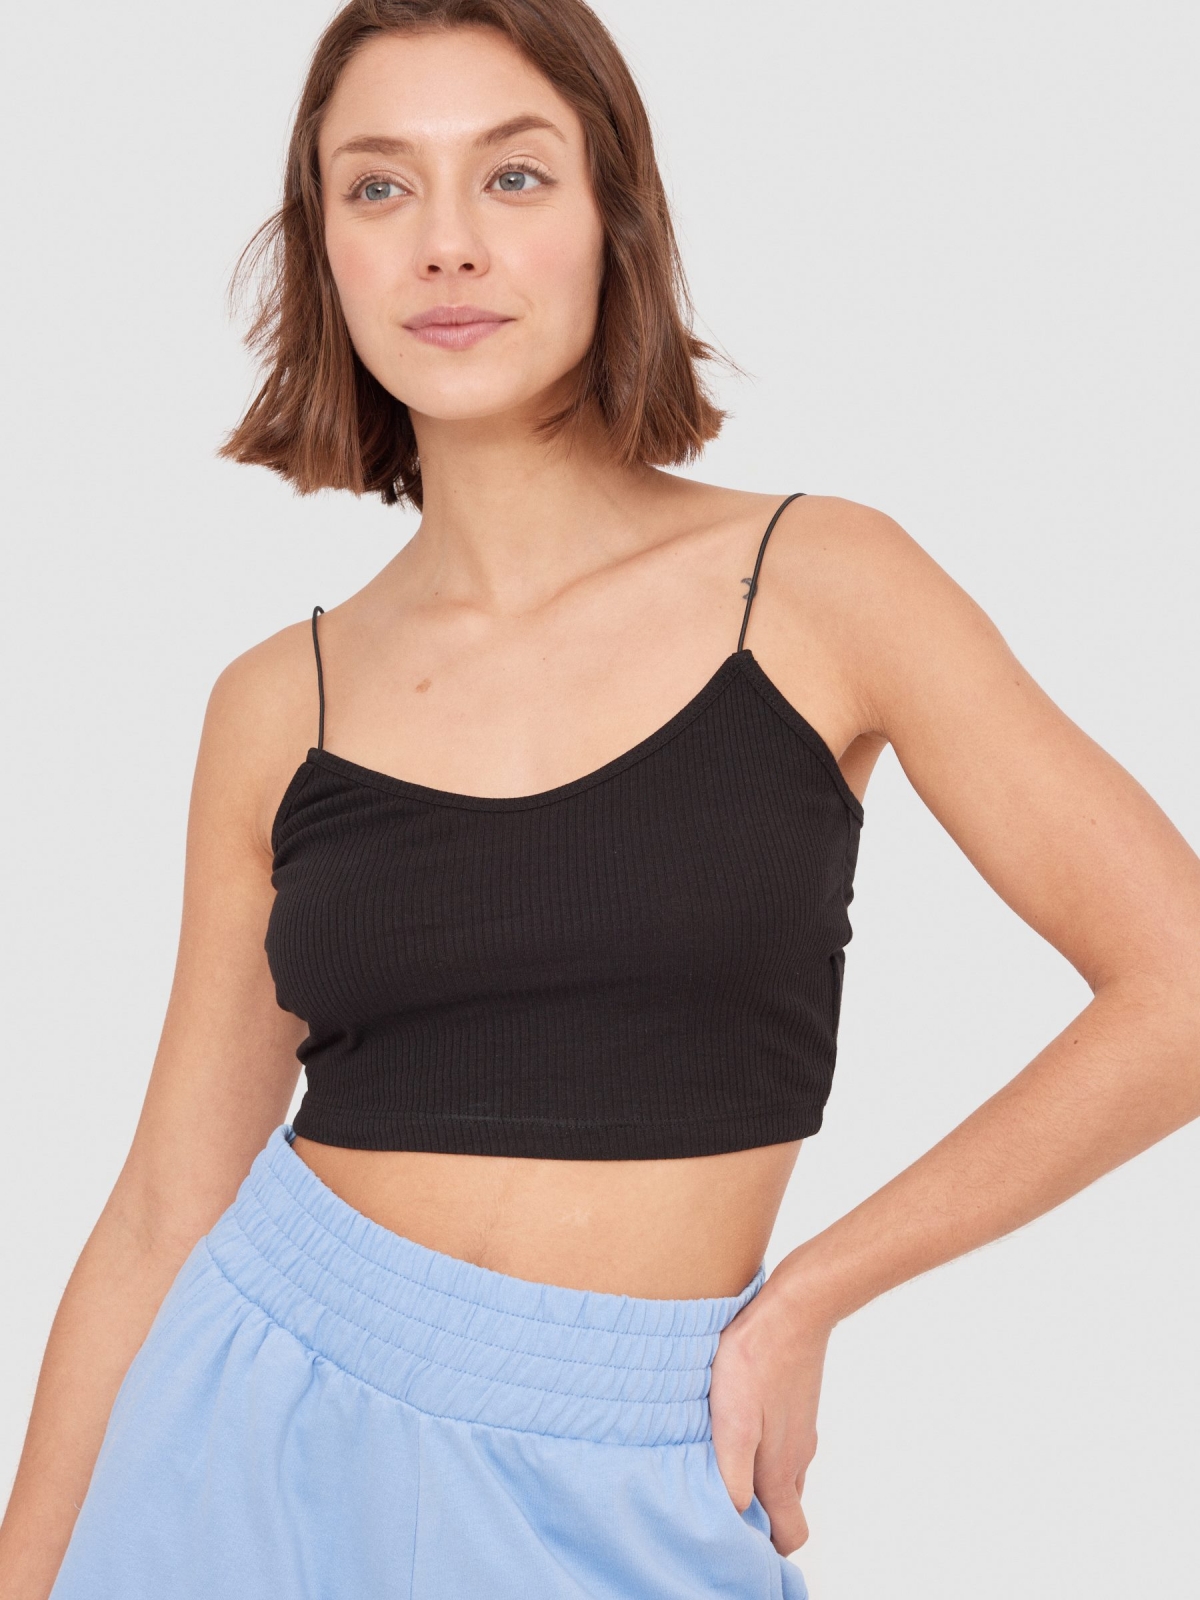 Ribbed strappy top black detail view